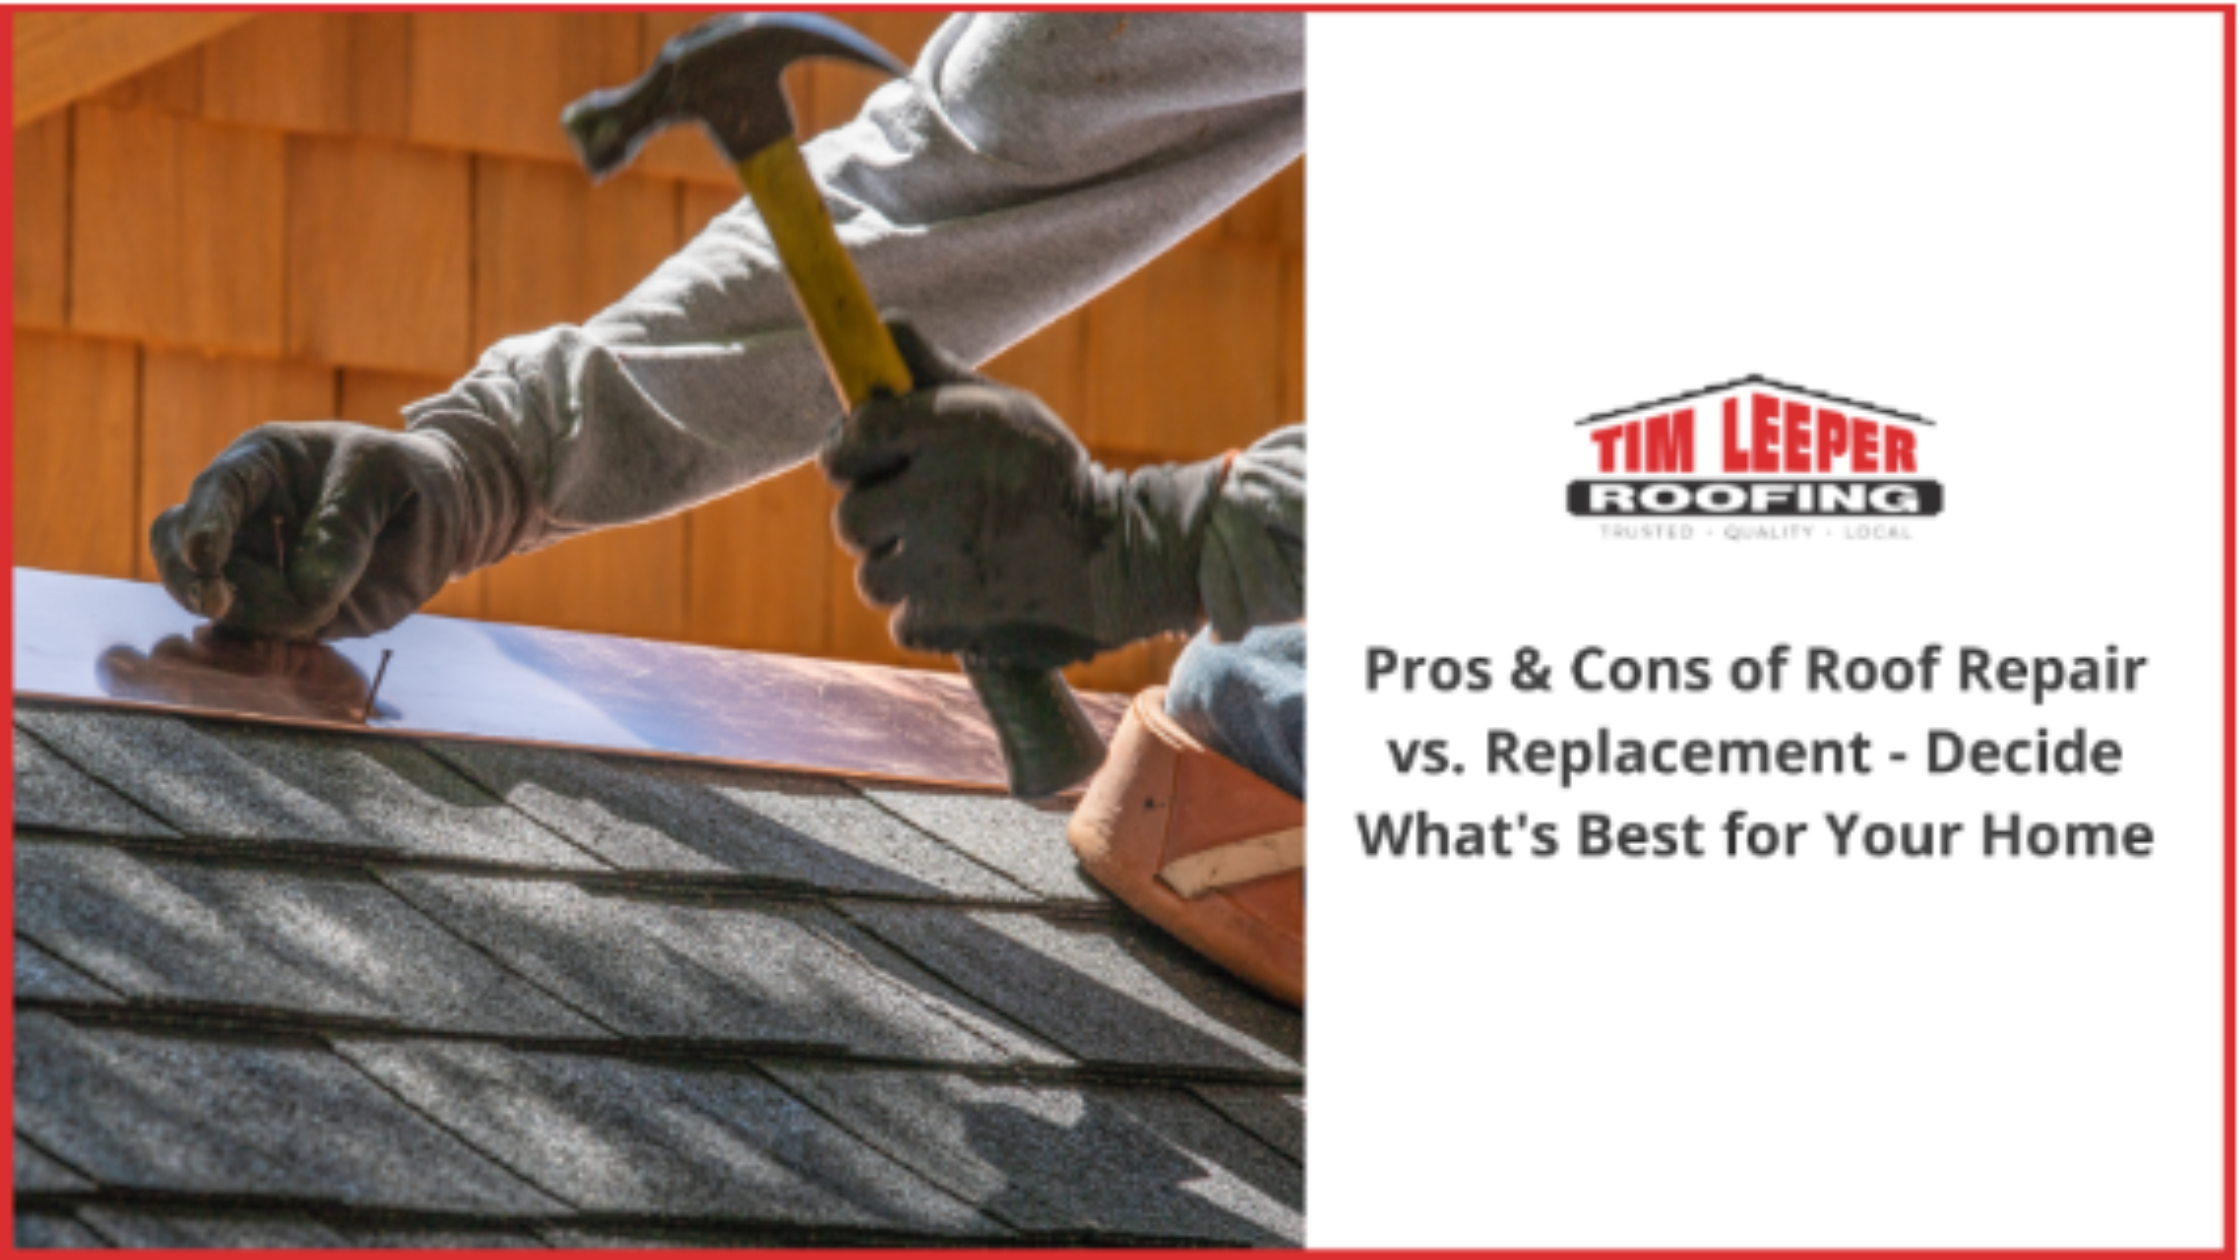 Pros & Cons of Roof Repair Vs. Replacement- Decide What's Best for Your Home